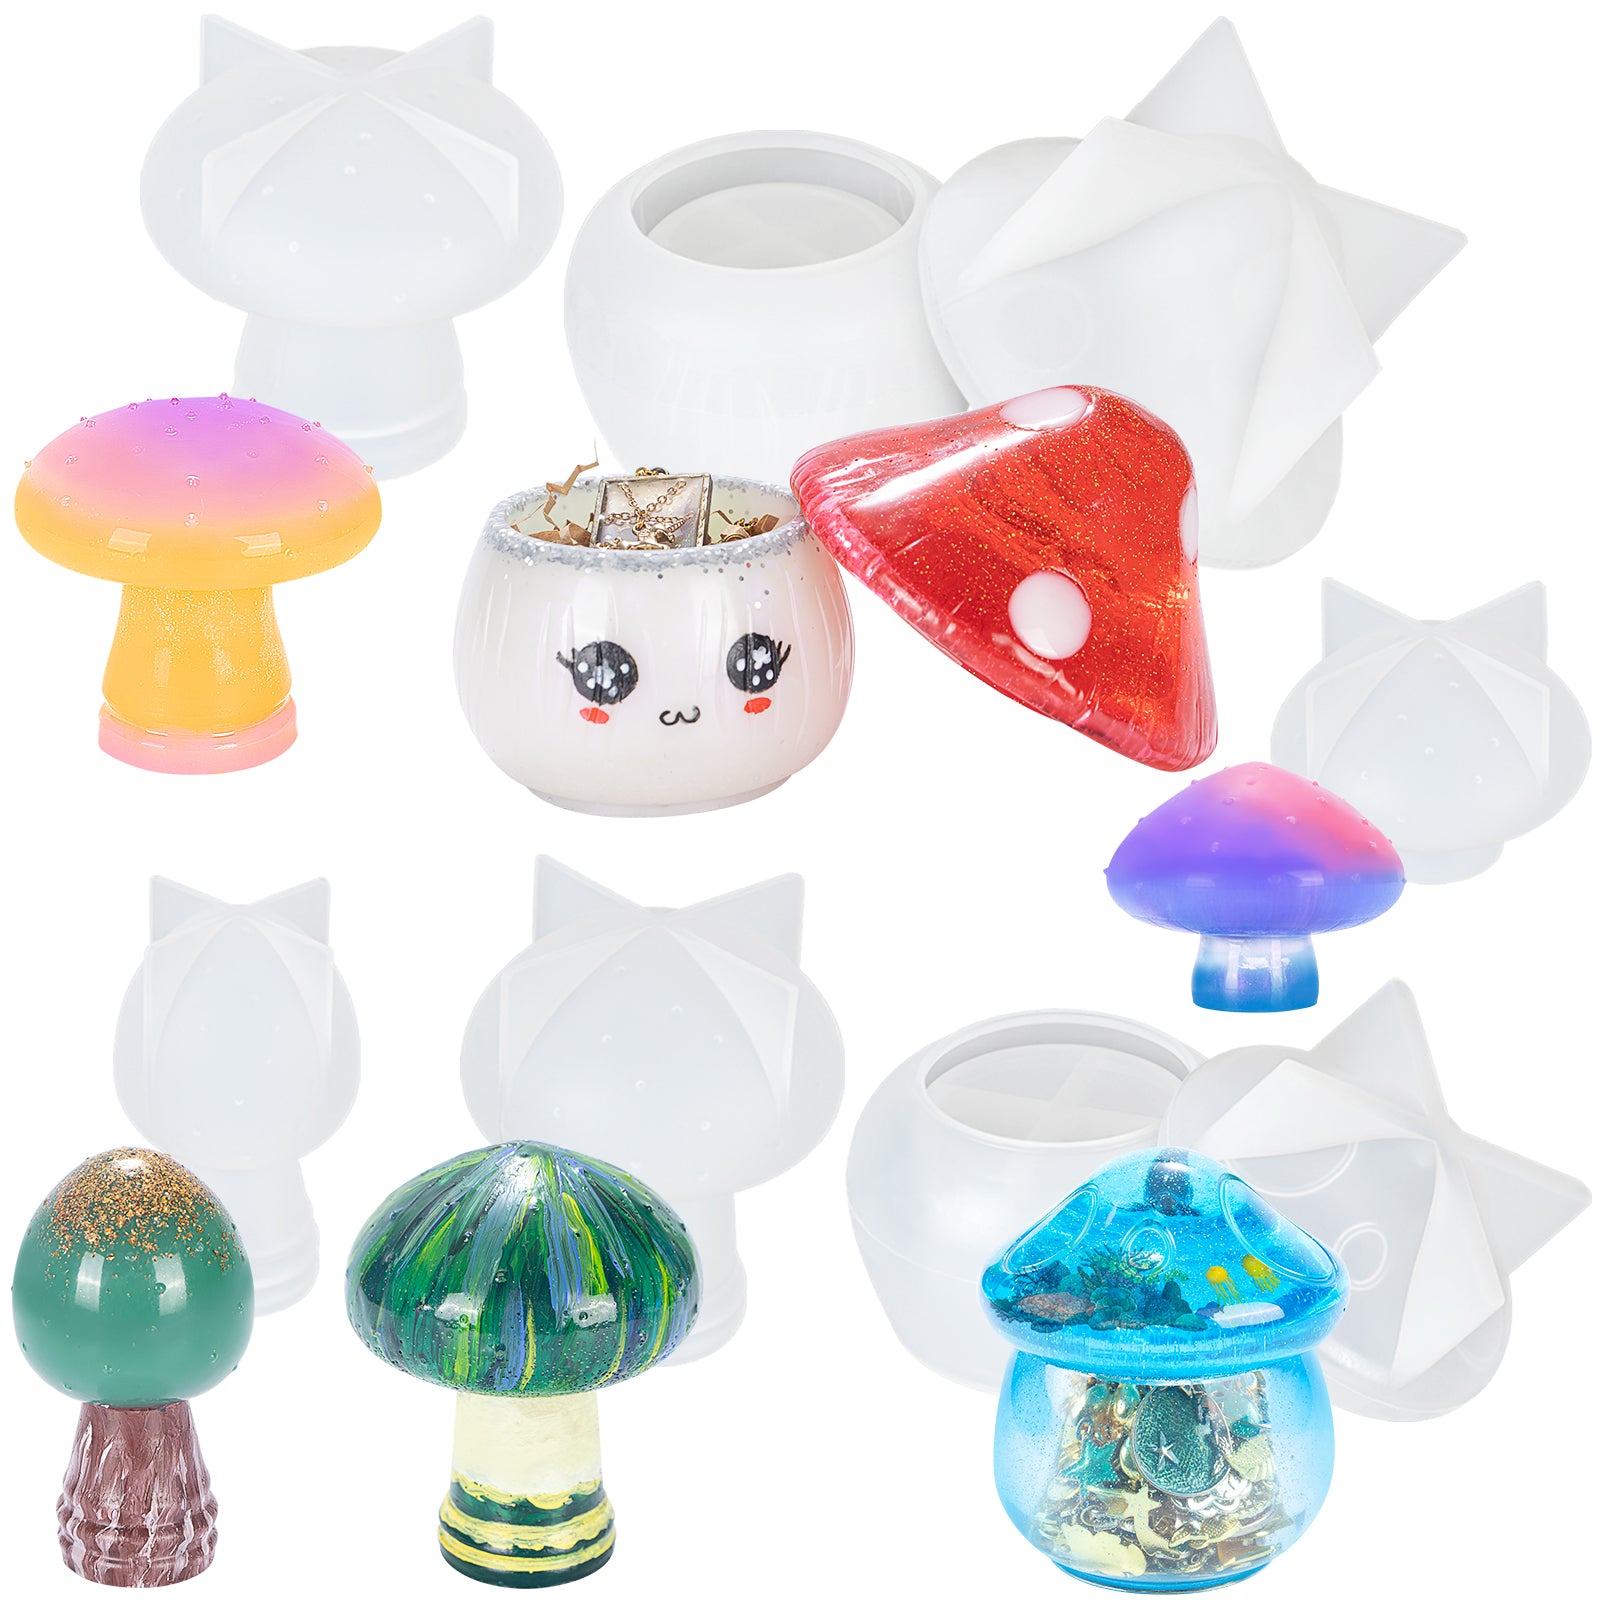 Funshowcase Mushroom Epoxy Resin Silicone Mold Variety Pack of 6 with Lid